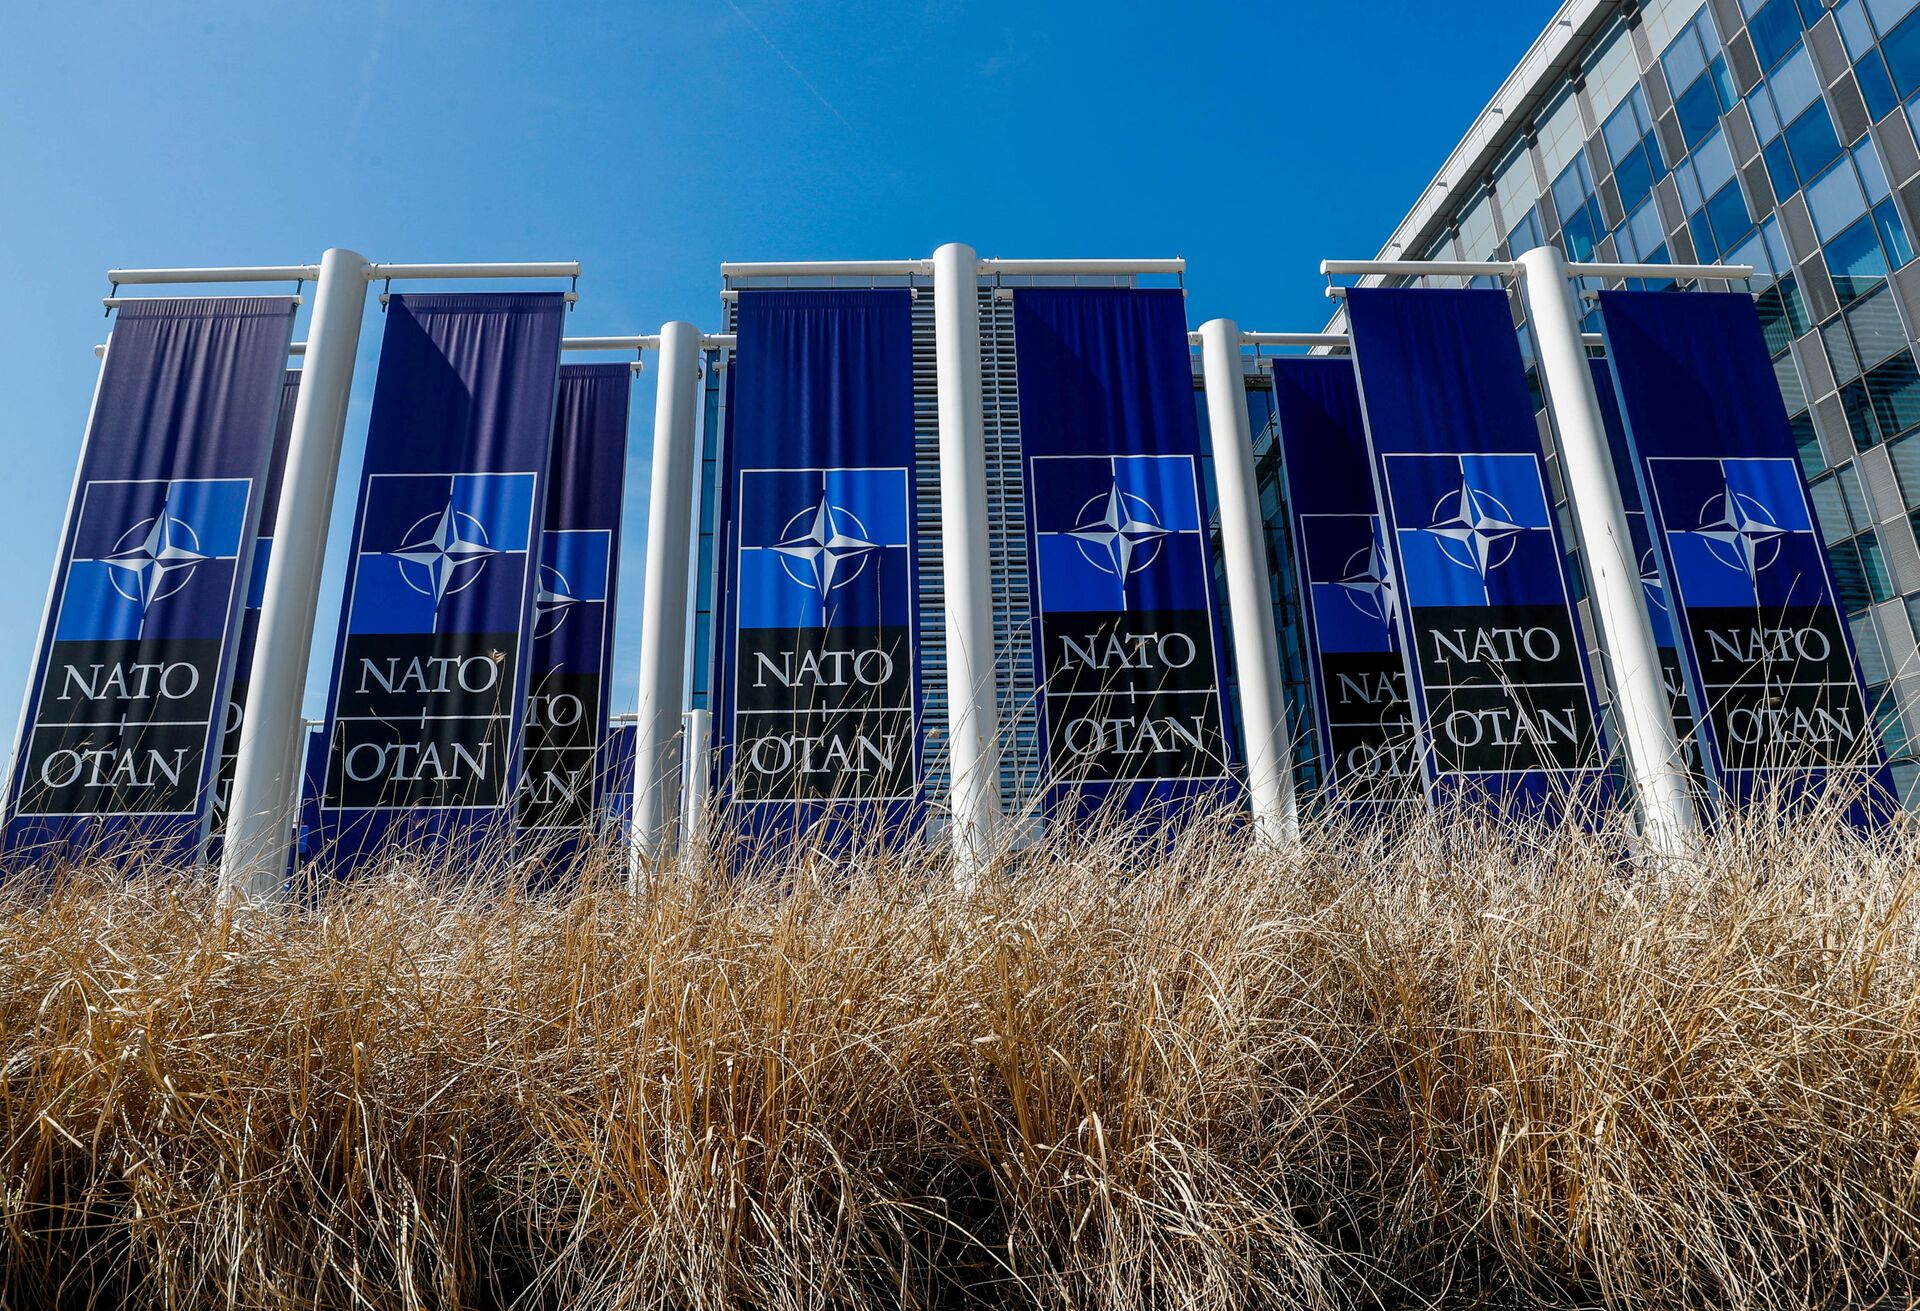 FILE PHOTO: Banners displaying the NATO logo are placed at the entrance of new NATO headquarters during the move to the new building, in Brussels, Belgium April 19, 2018.  REUTERS/Yves Herman/File Photo - Sputnik International, 1920, 09.04.2022